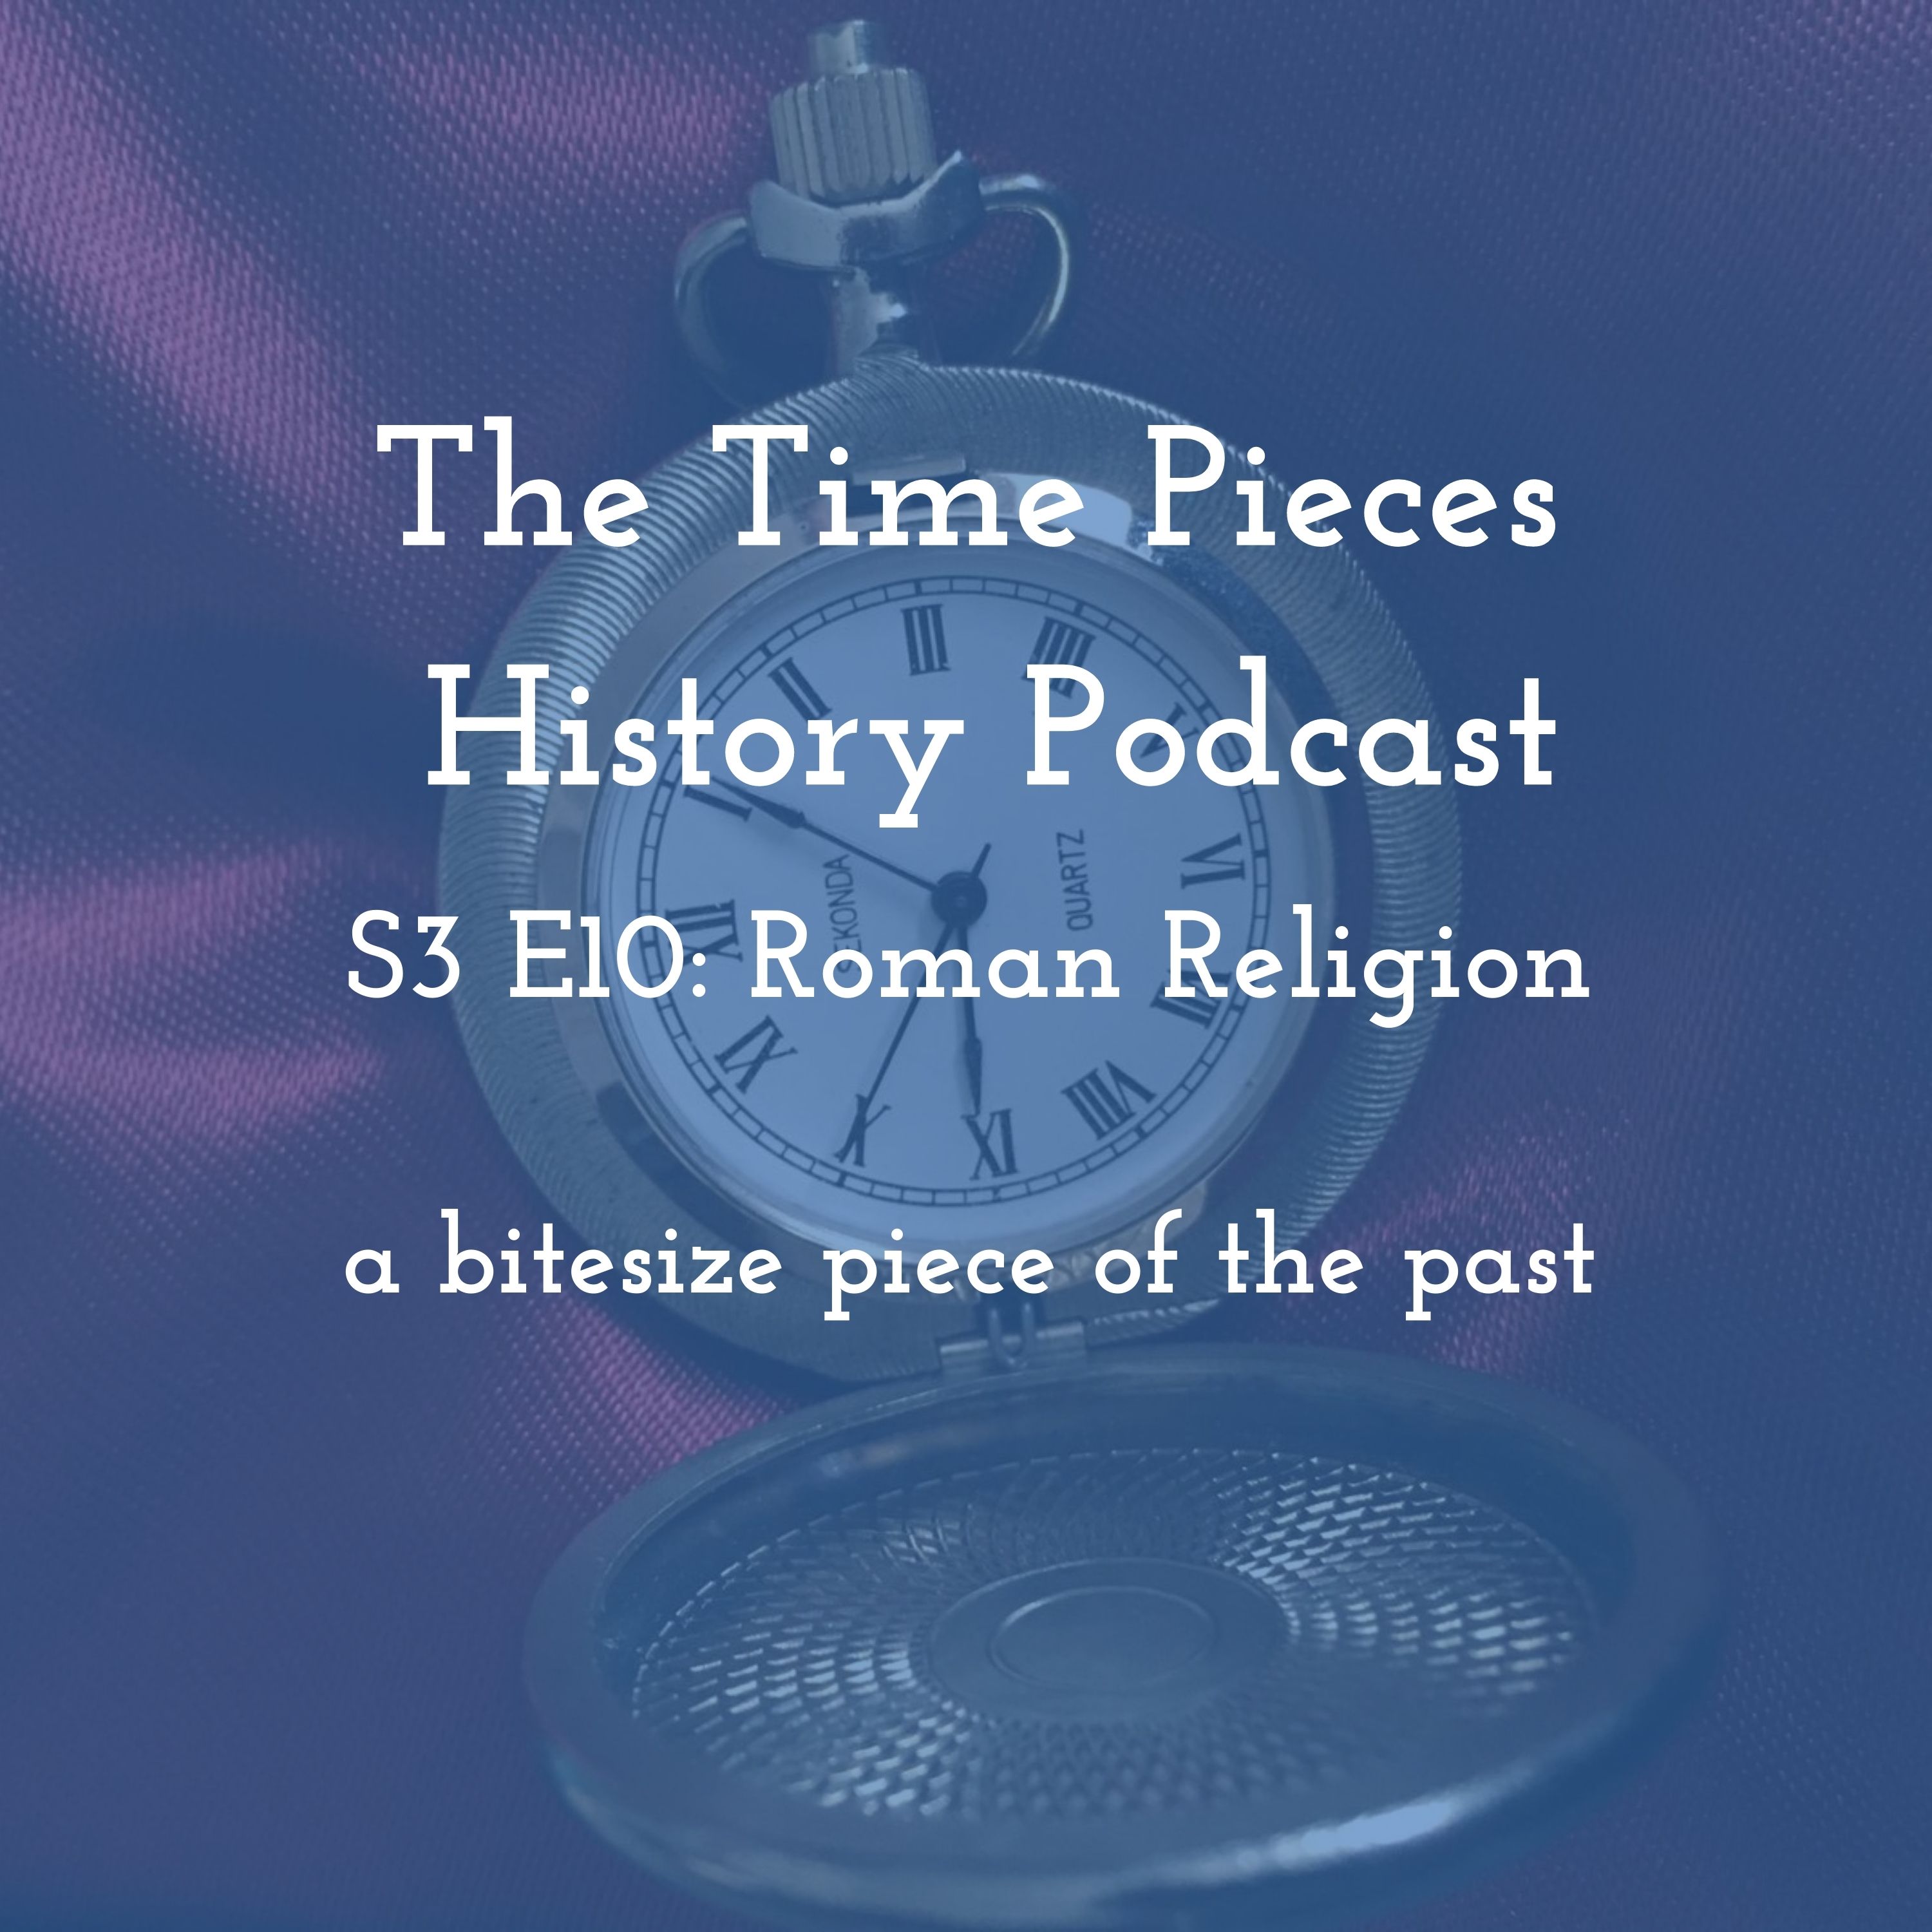 Artwork for podcast Time Pieces History